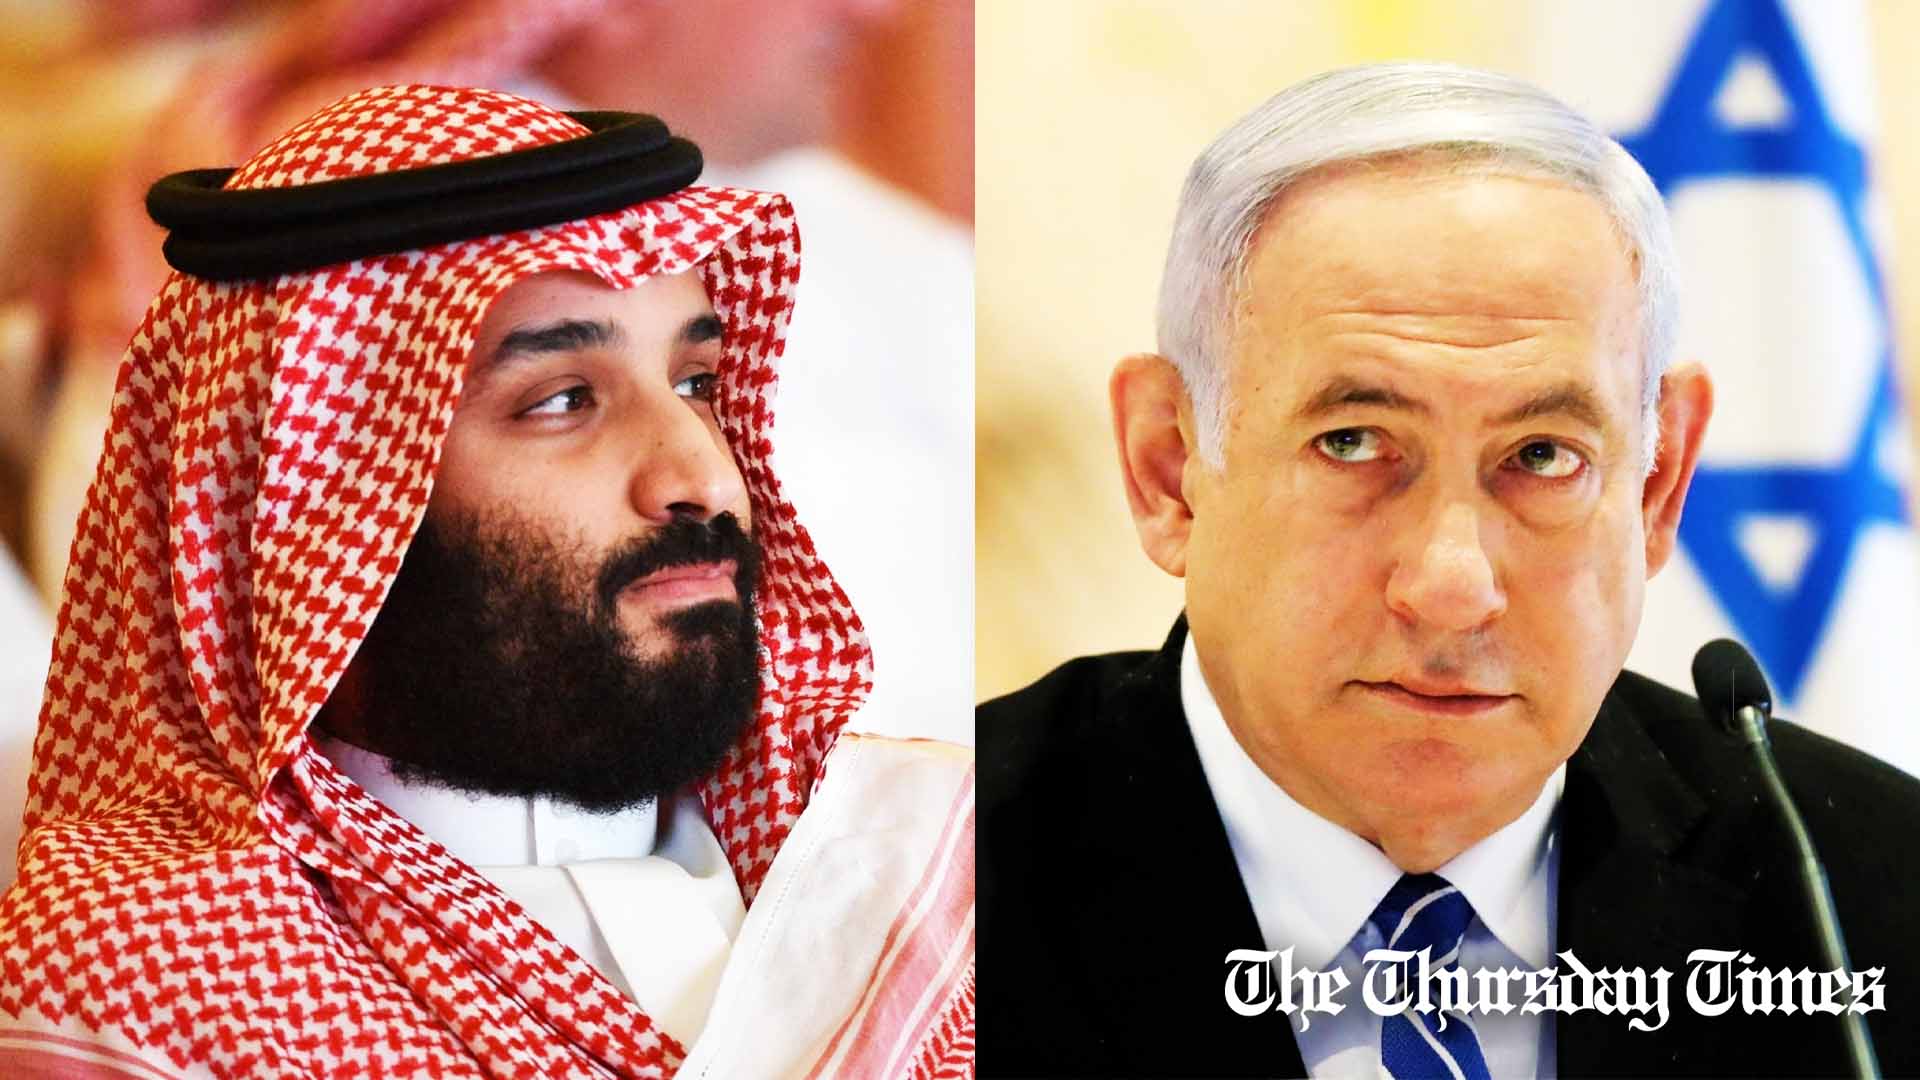 A file photo is shown of Saudi crown prince Mohammad bin Salman (L) and Israeli prime minister Benjamin Netanyahu (R). — FILE/THE THURSDAY TIMES